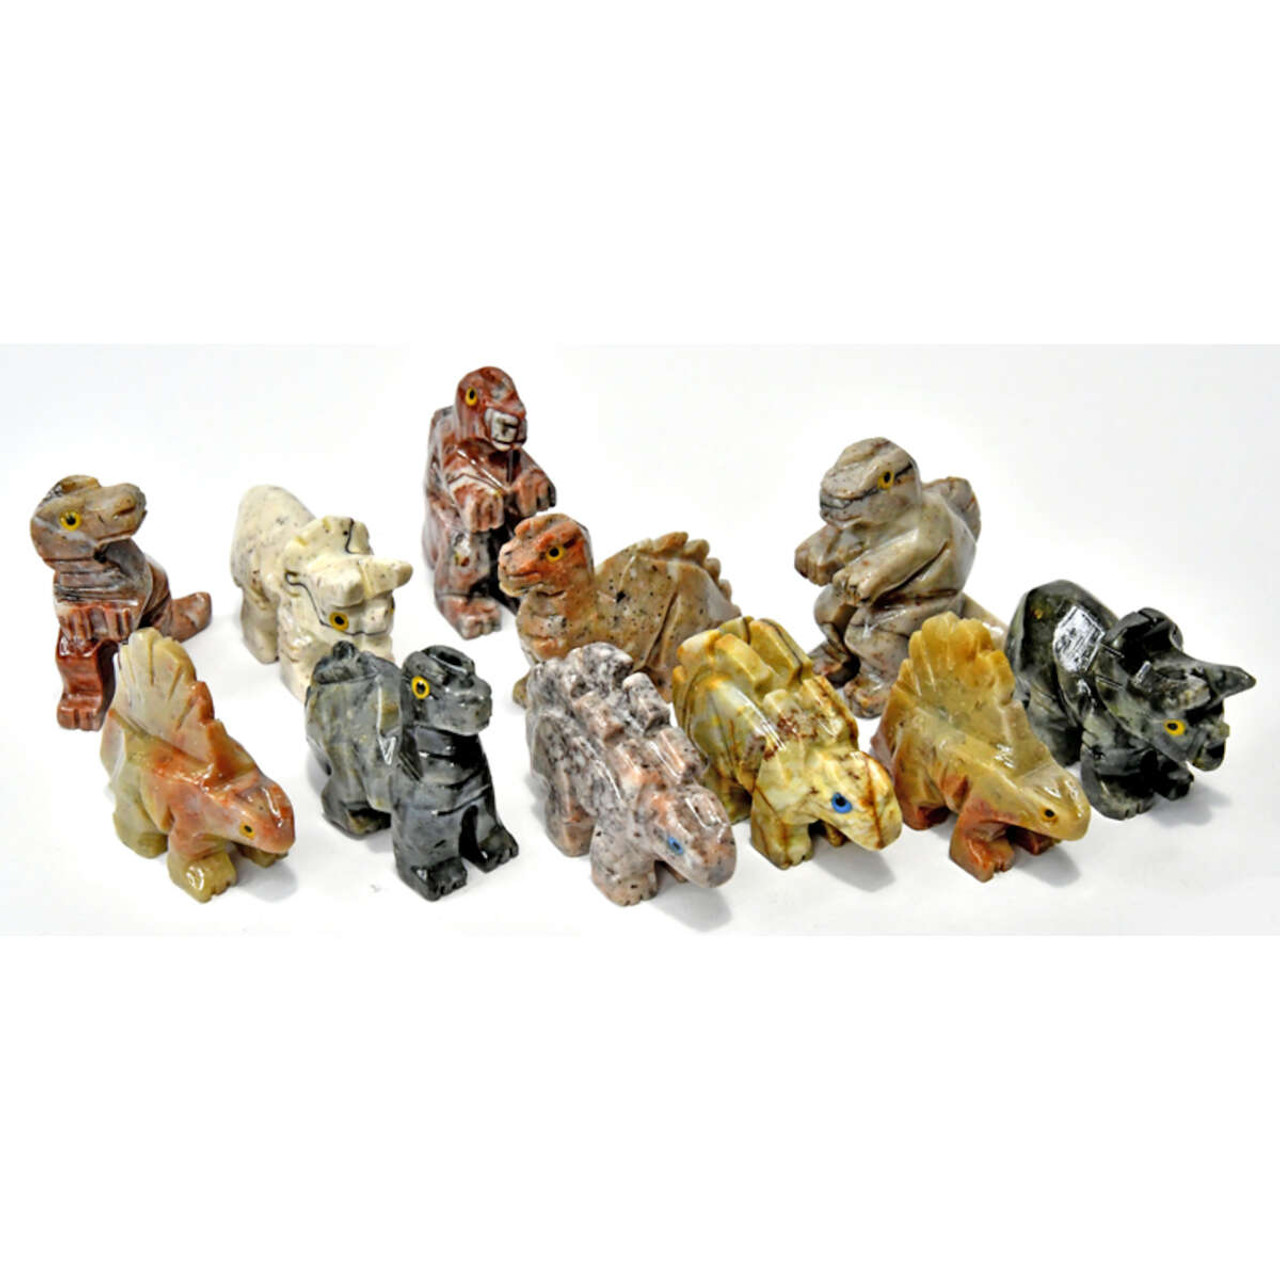 Dinosaurs Stone Carving Collection (set of 12)